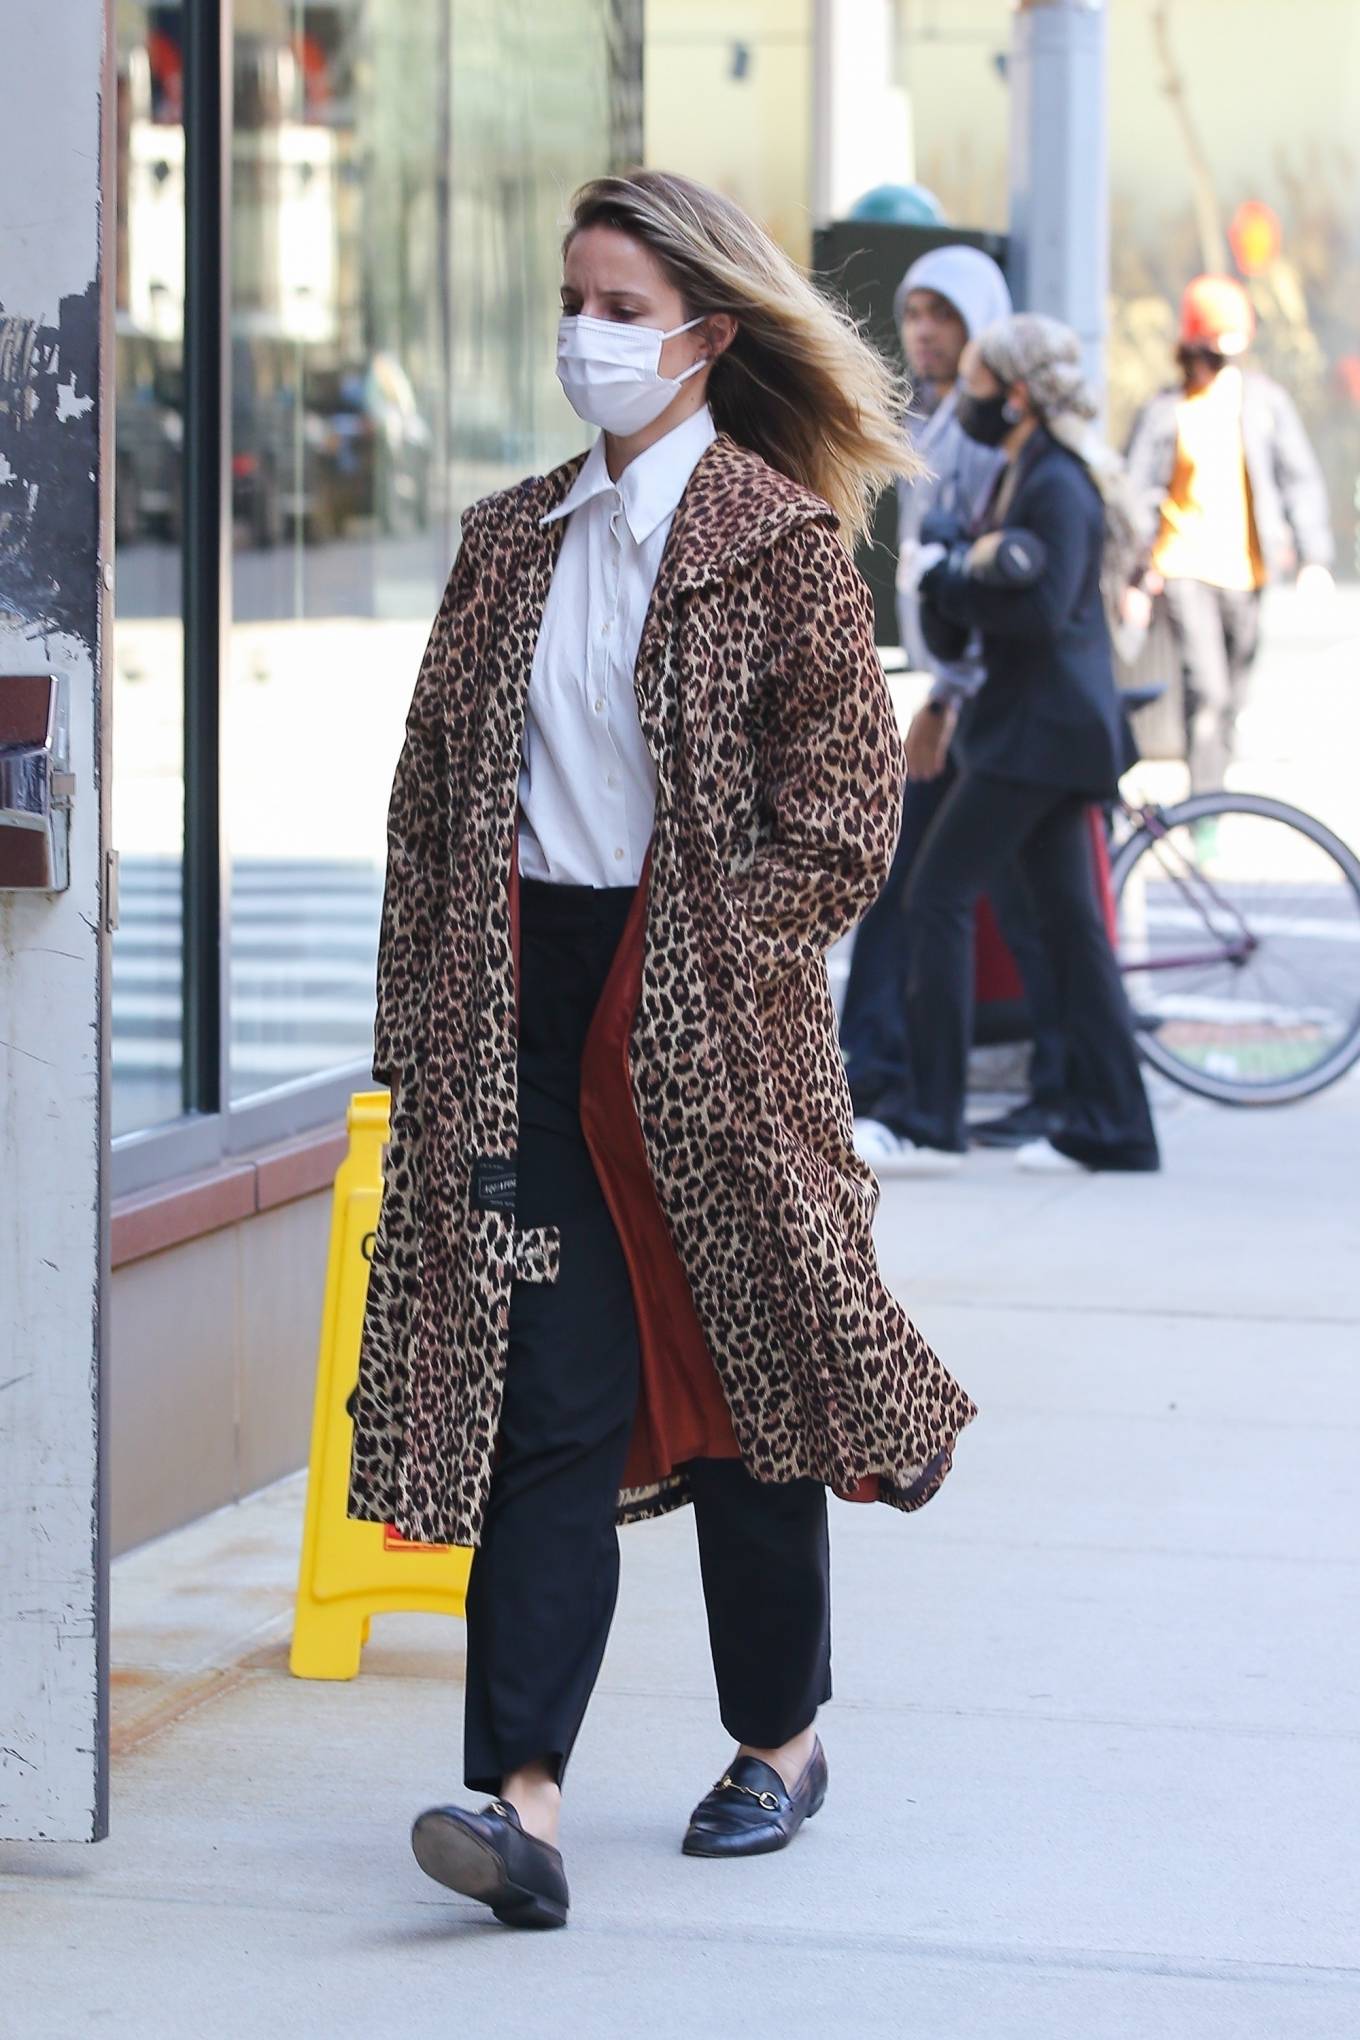 Dianna Agron 2021 : Dianna Agron – In a leopard print overcoat while out in New York-05